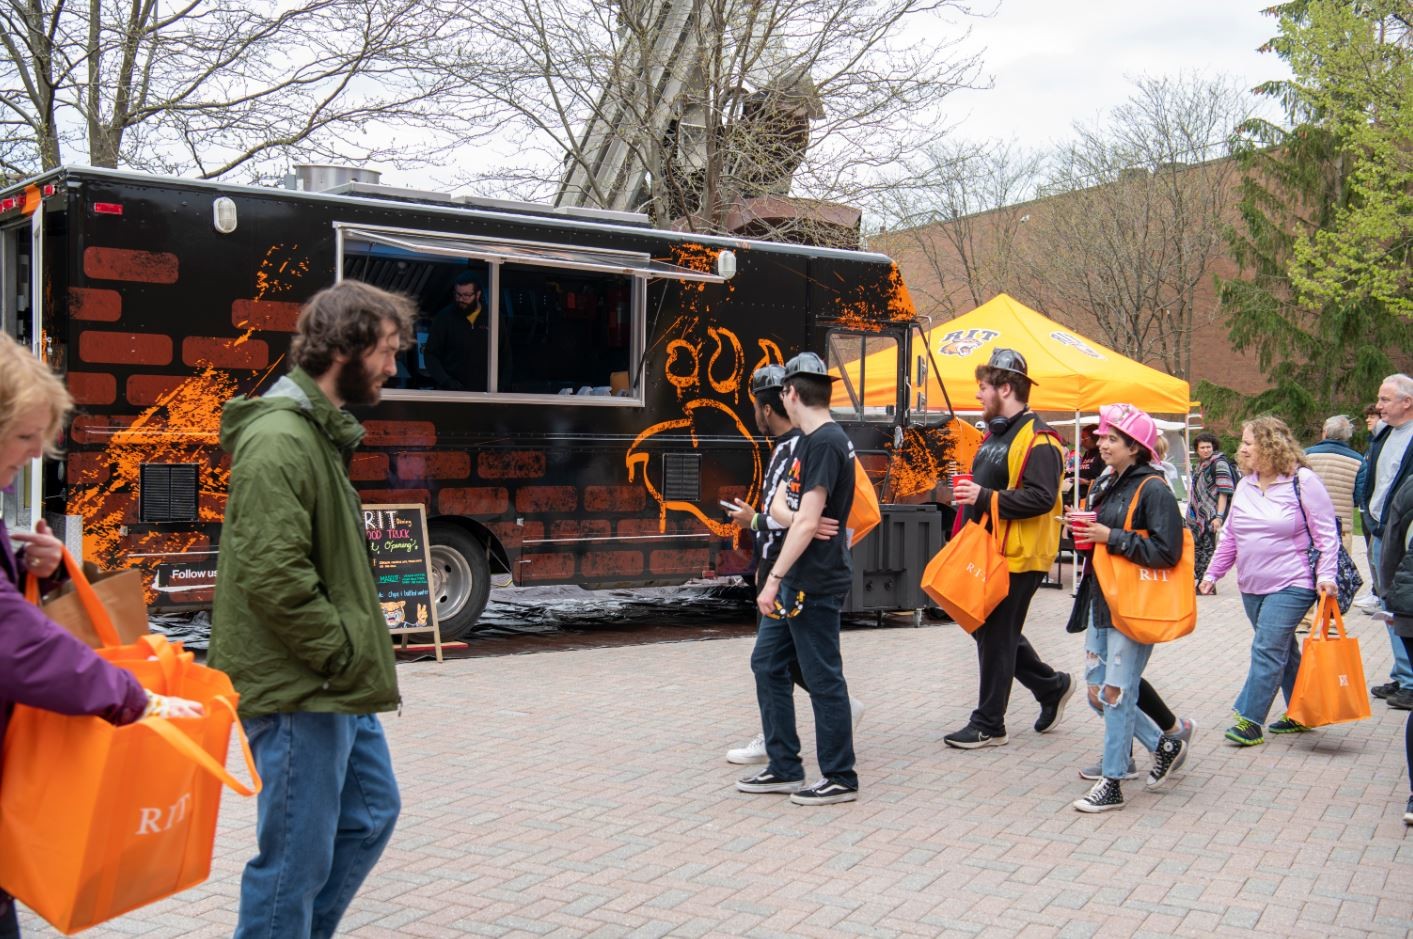 People walking outside the RIT Dining food truck 